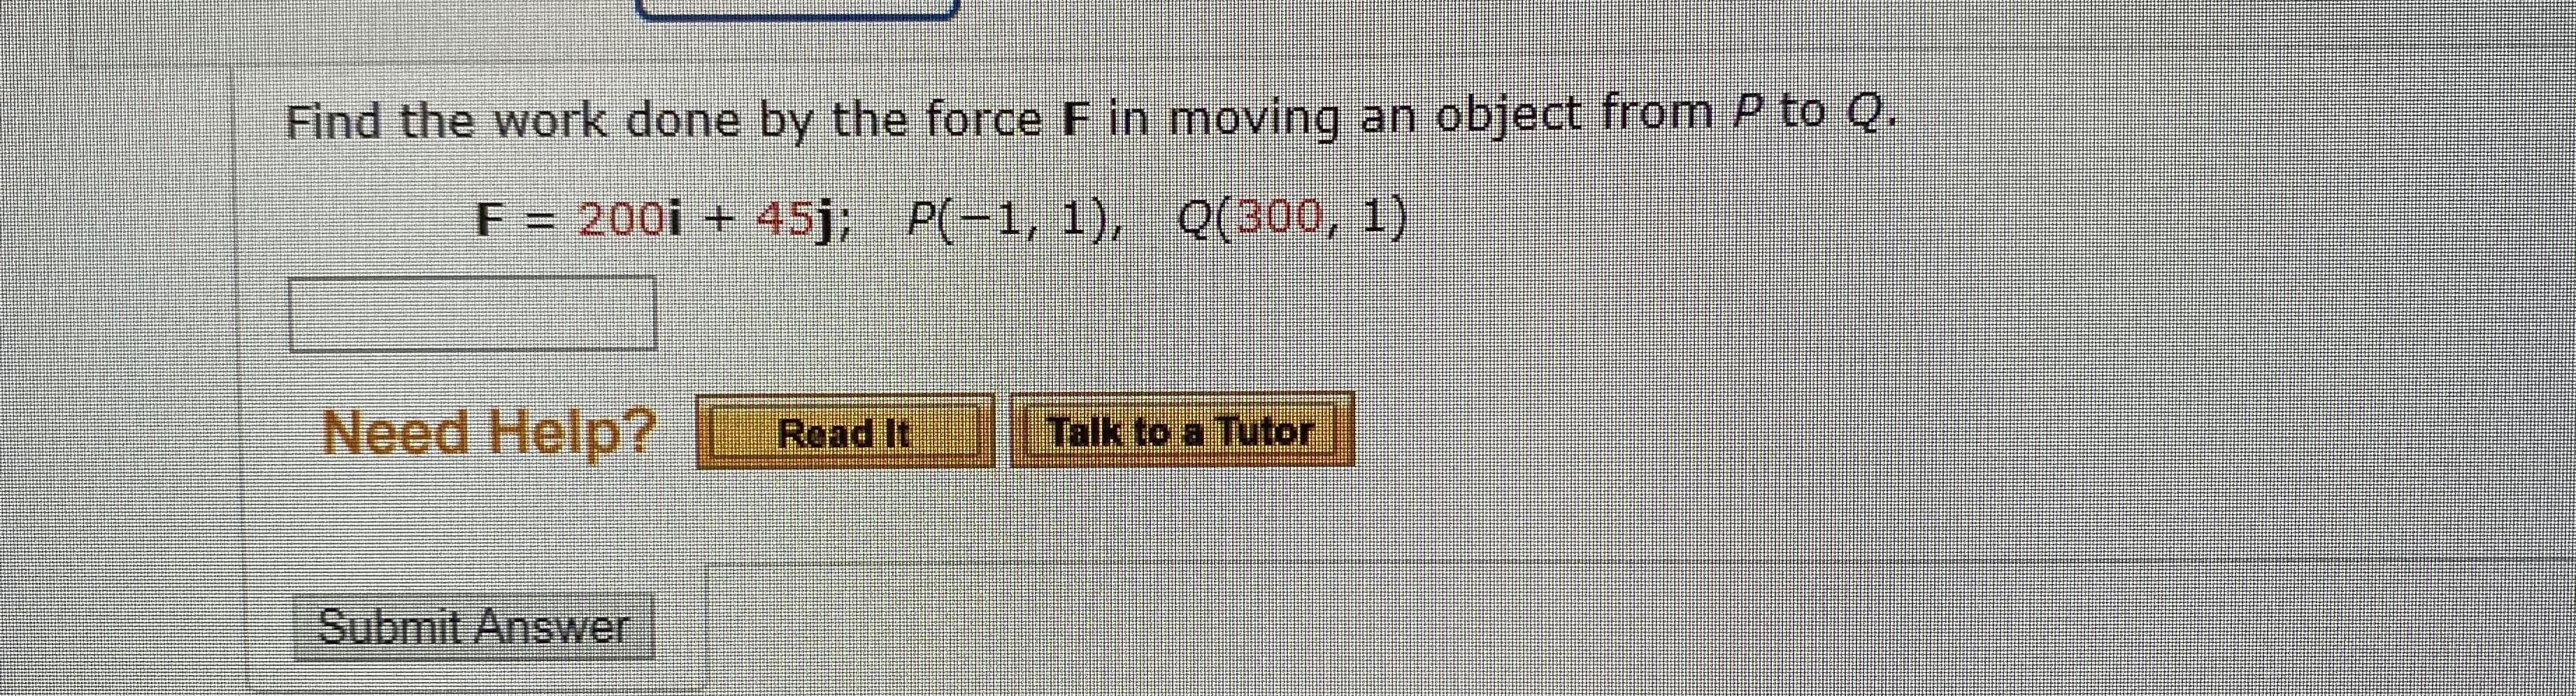 Find the work done by the force F in moving an object from P to Q.
F = 200i + 45j; P(-1, 1), Q(300, 1)
